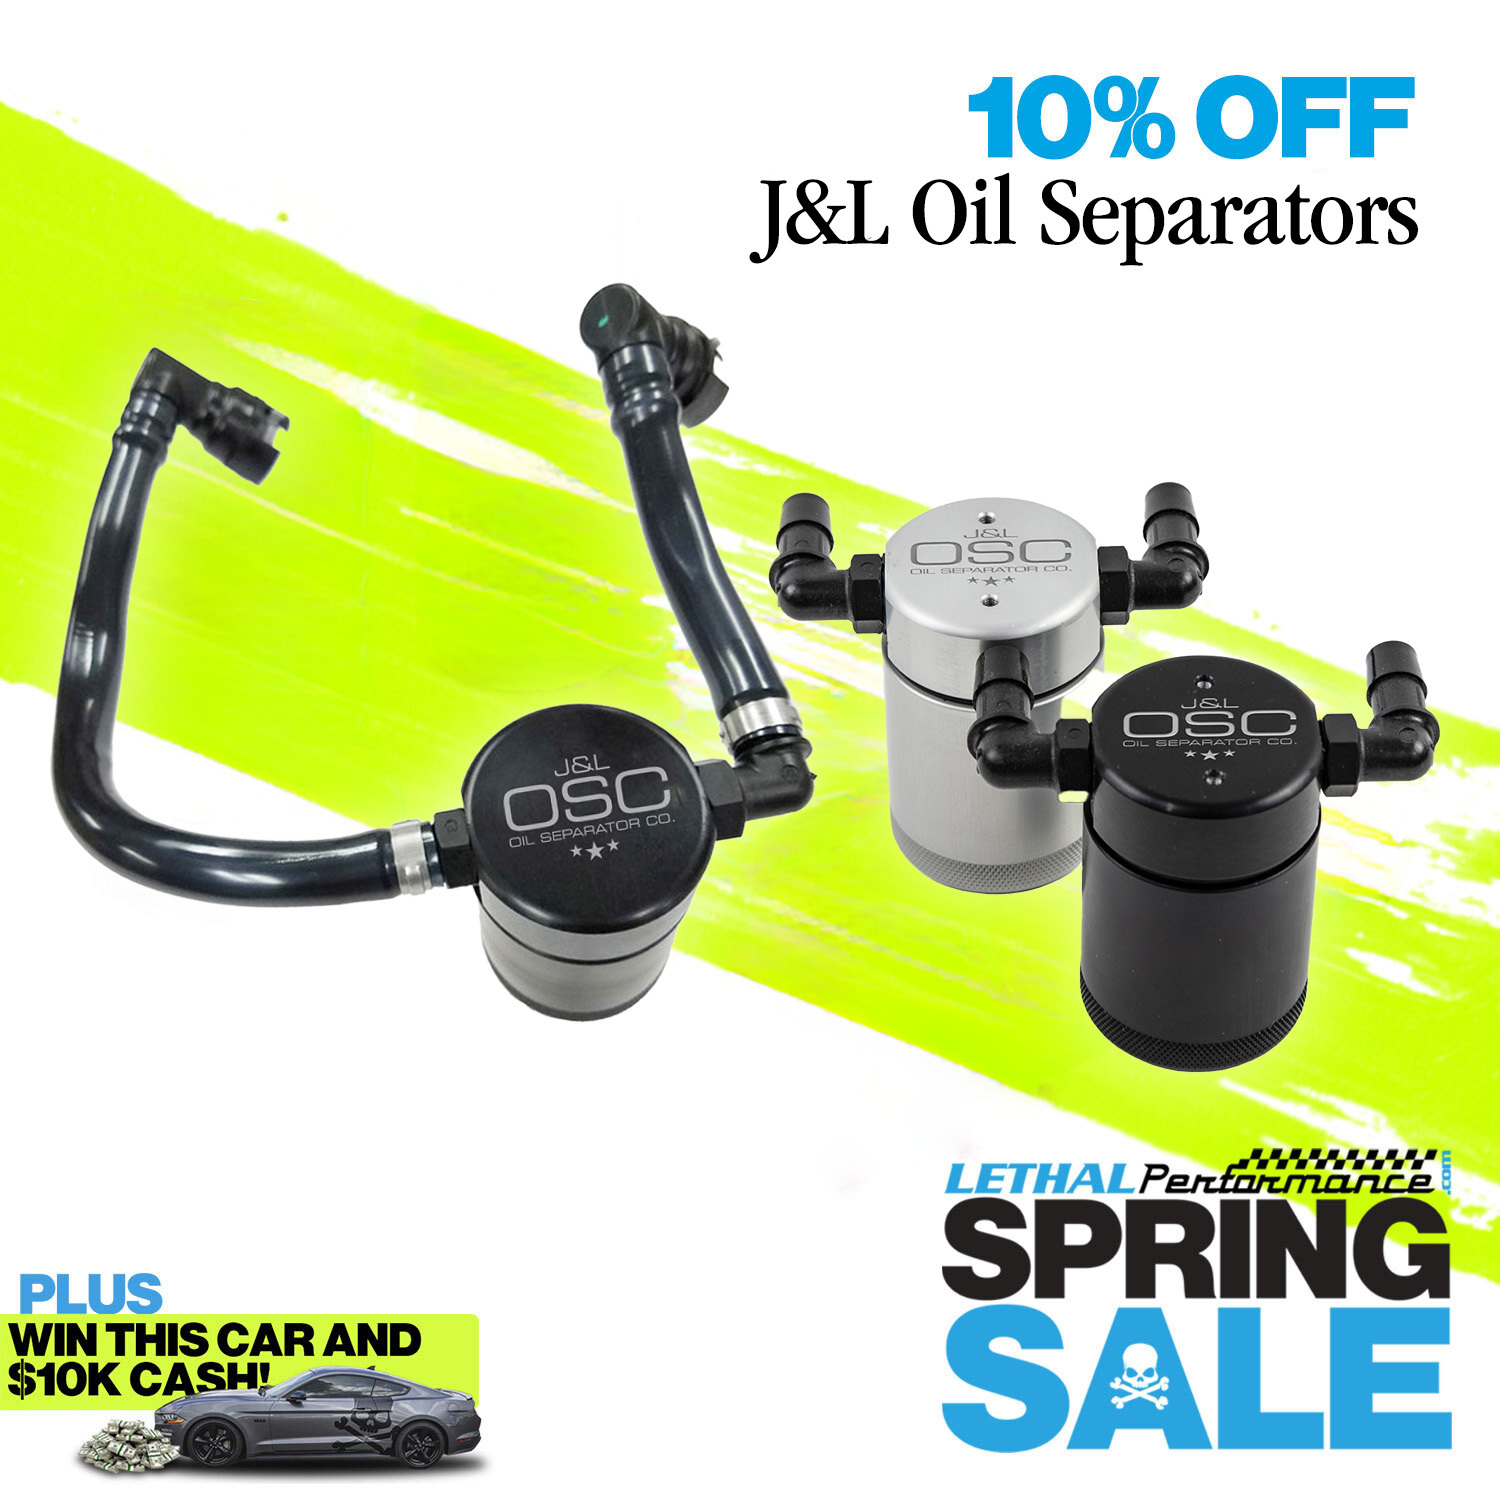 S650 Mustang Spring SALE has SPRUNG here at Lethal Performance!! springsale_J&L